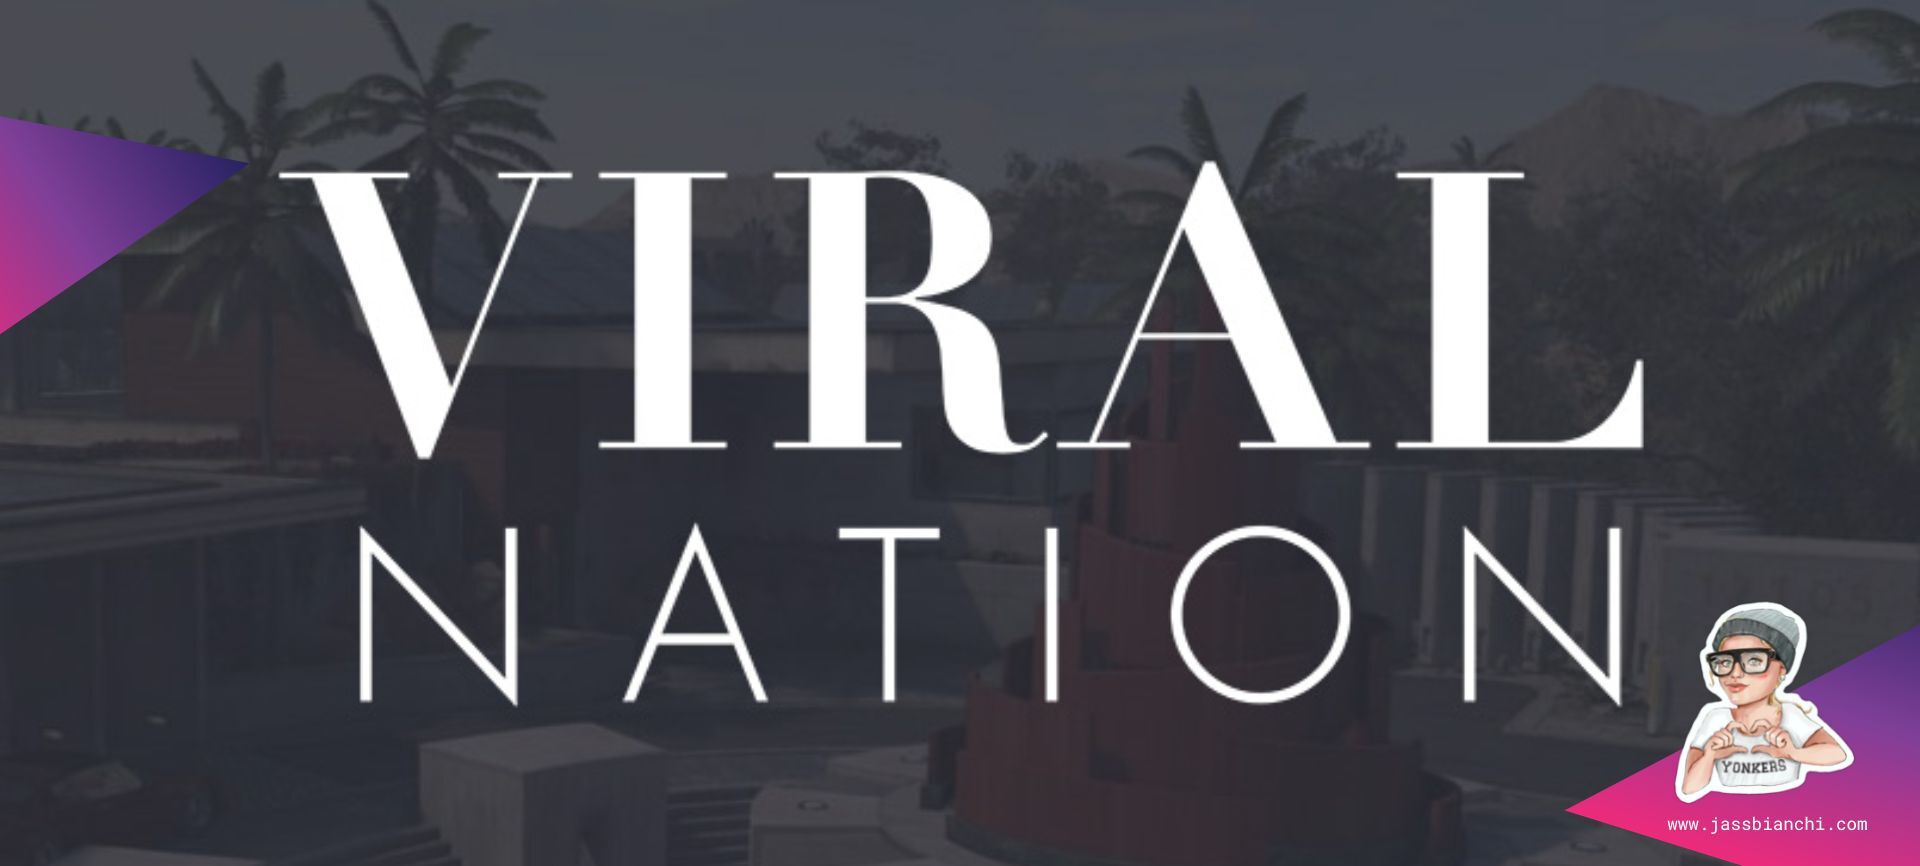 Viral Nation is another top social media agency for musicians